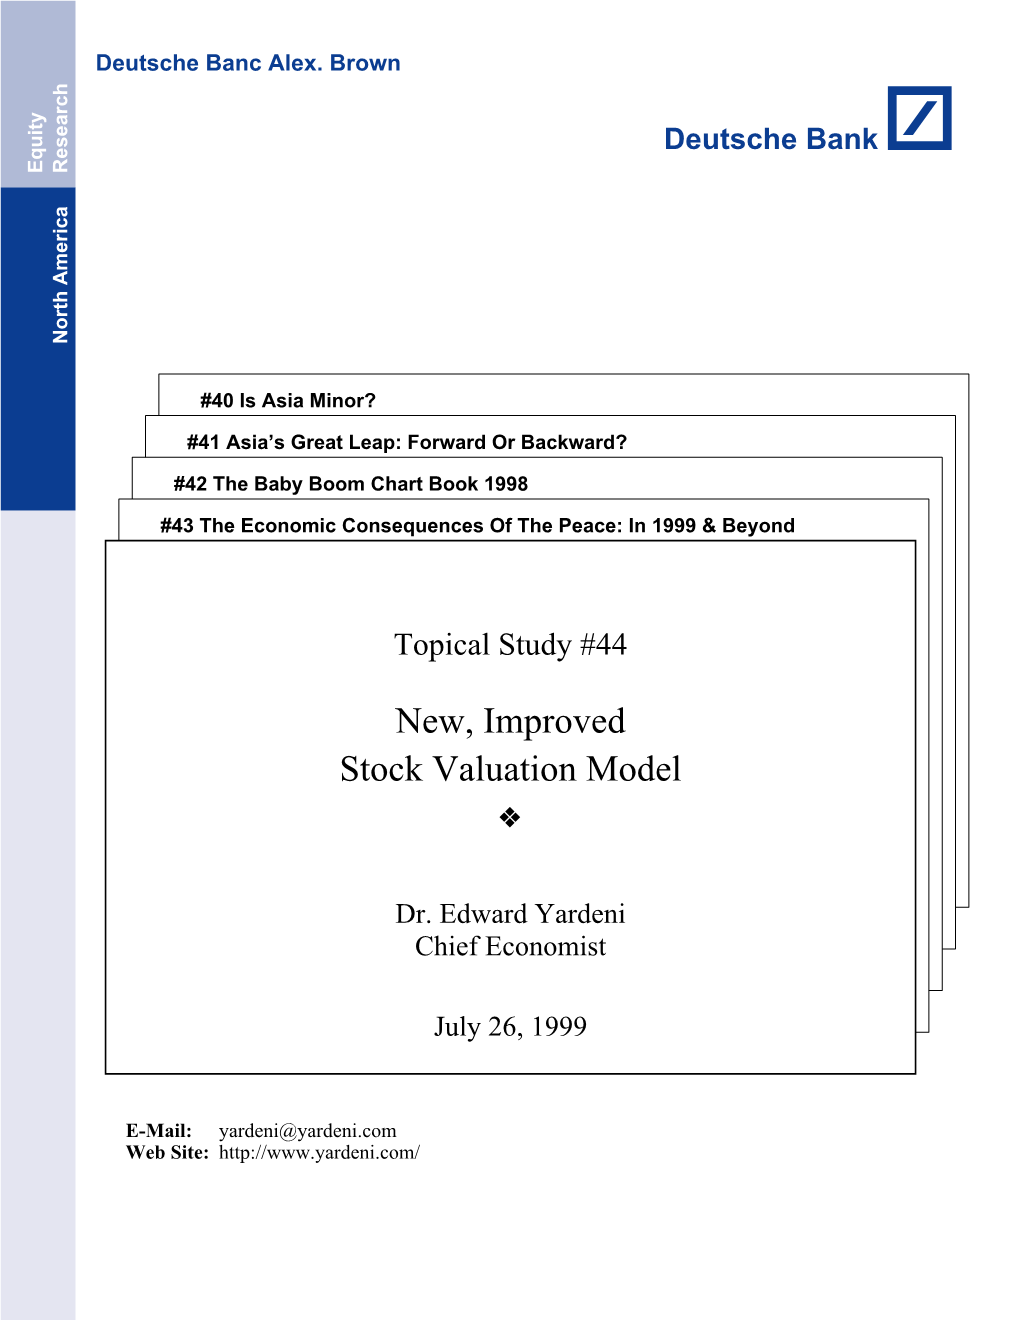 New, Improved Stock Valuation Model ❖